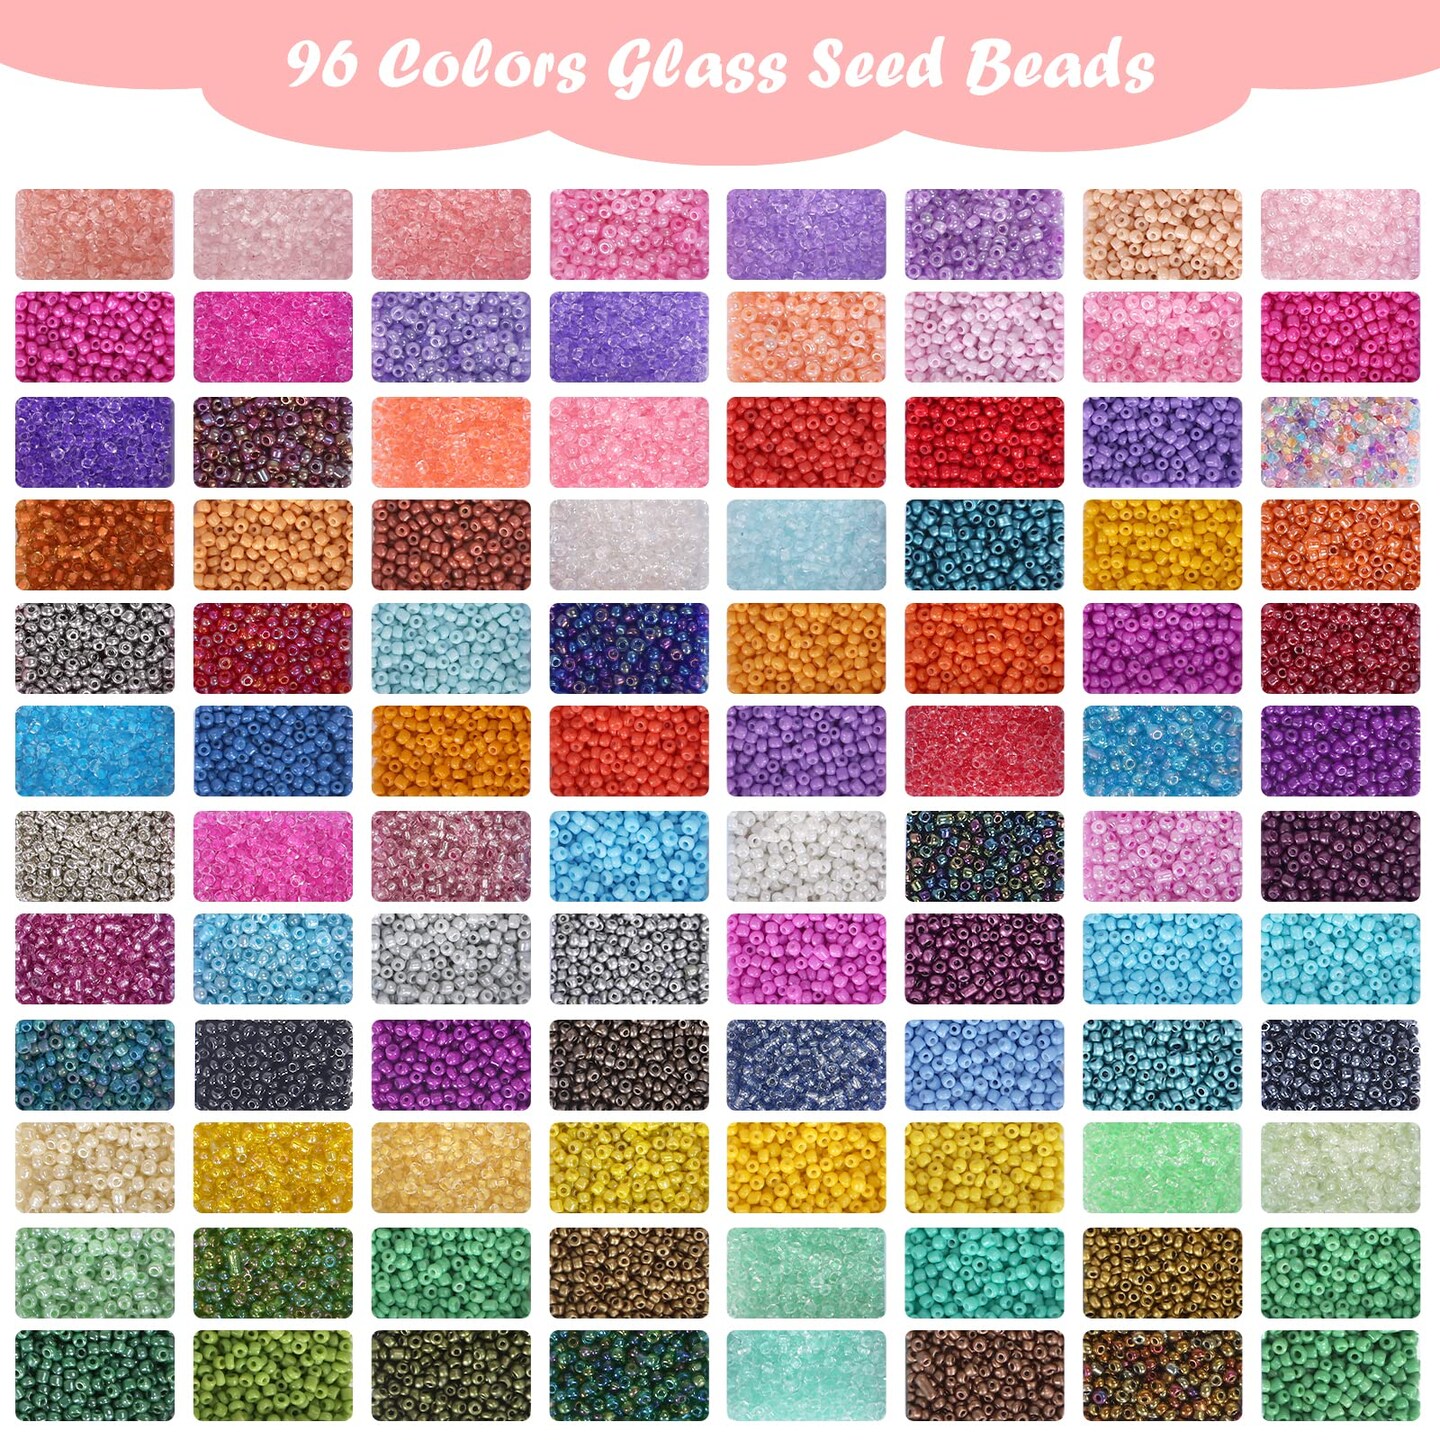 Quefe QUEFE 9600pcs 4mm Glass Seed Beads Kit for Jewelry Making